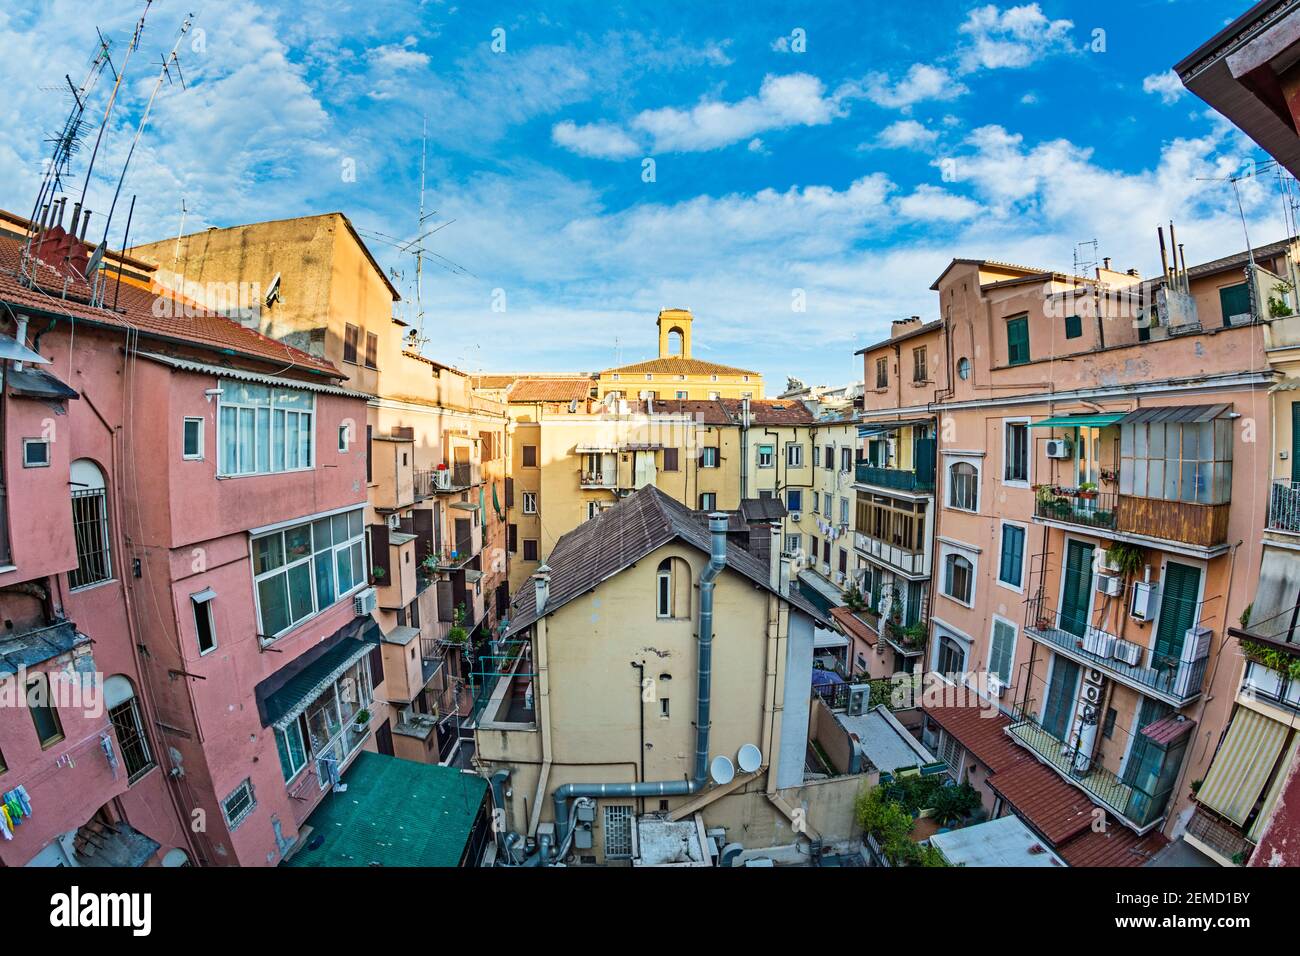 Rome, Italy - Oct 03, 2018: View from the Floridia hotel apartments inside the district, Rome Stock Photo